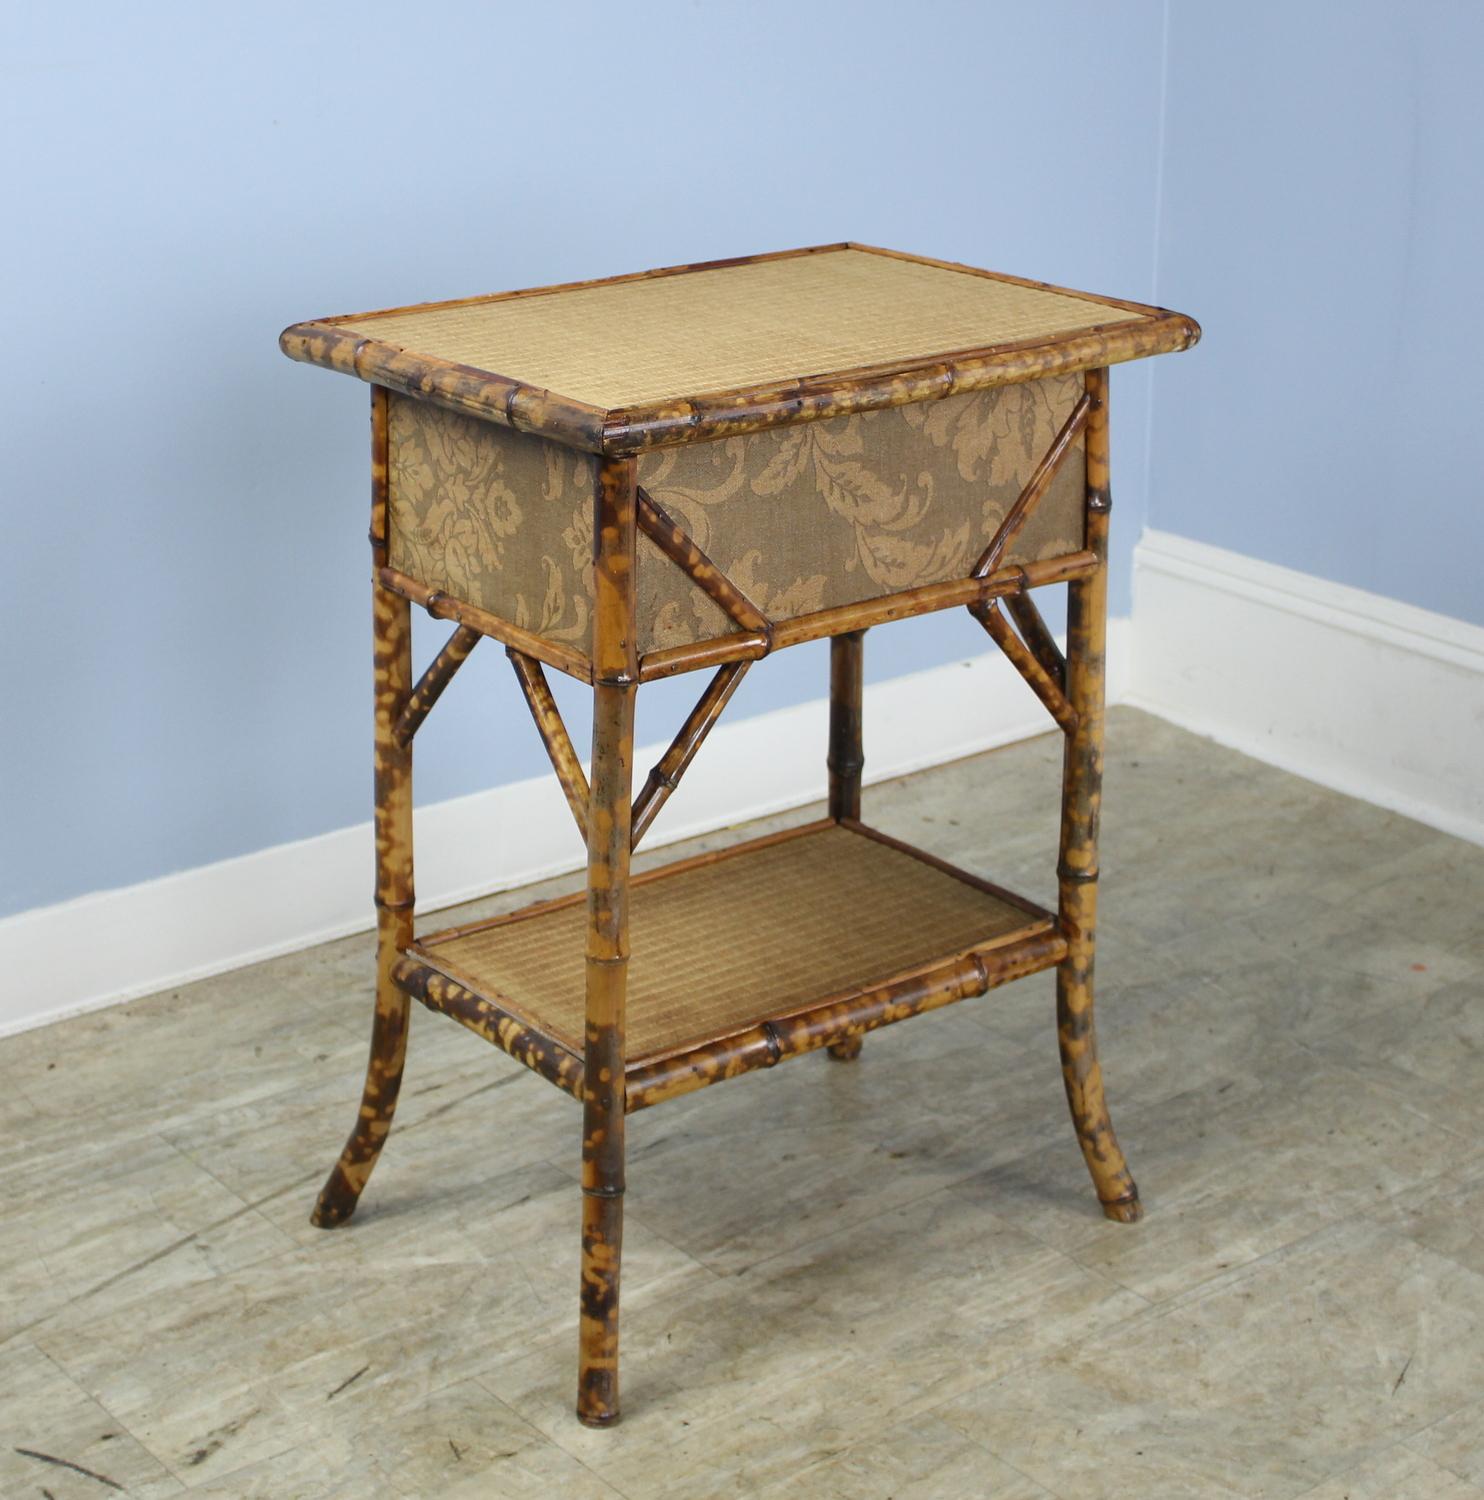 An attractive antique bamboo side table, originally a sewing box on flared legs. The box lifts from one hinged side, and has a floral motif on the side. A delicate and charming side table or end table.